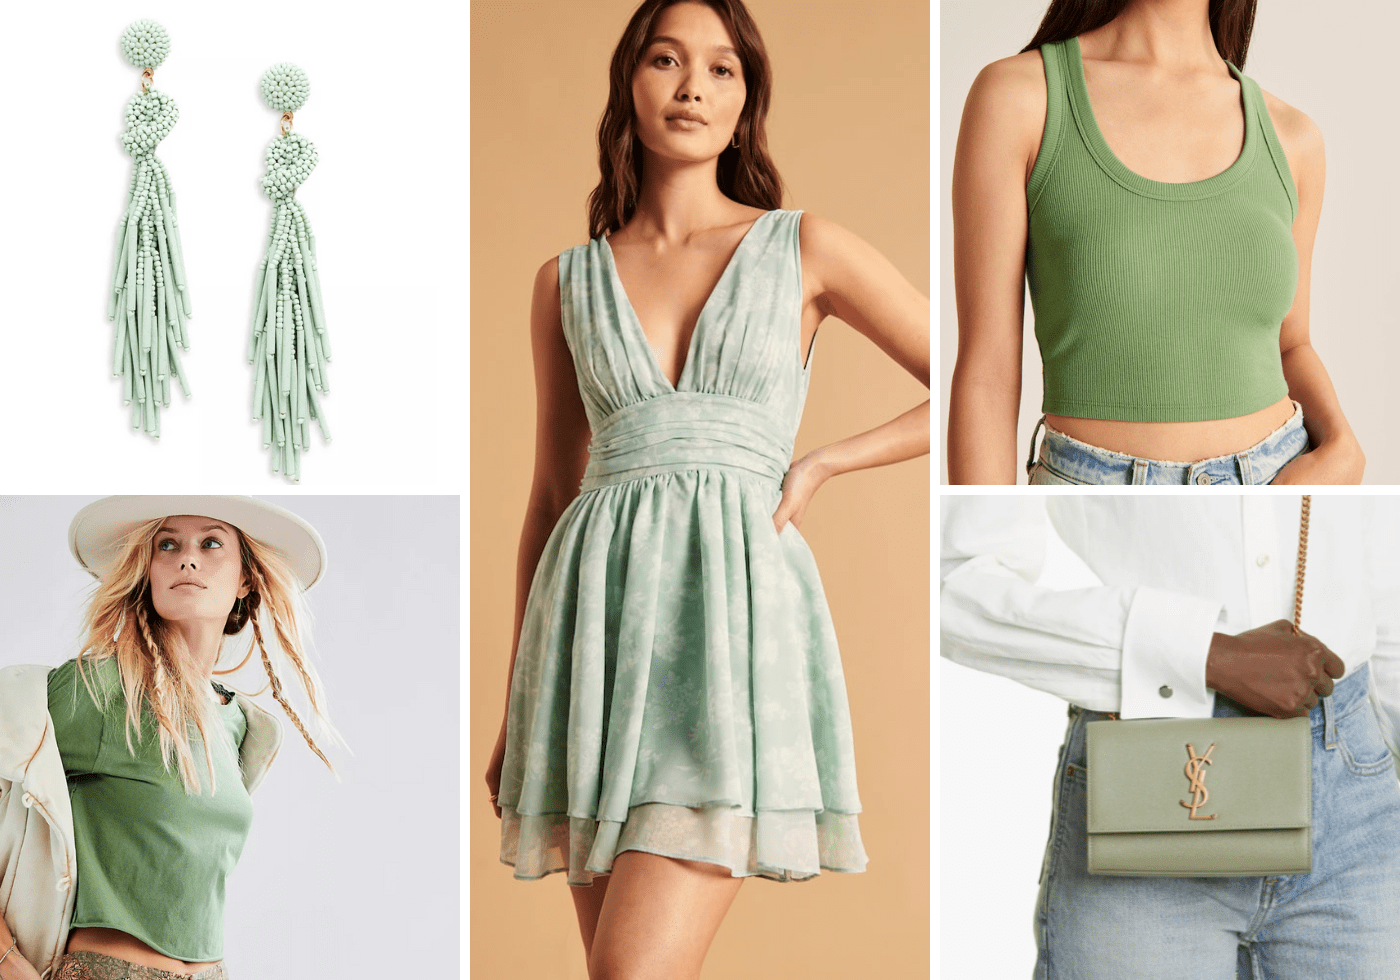 green aesthetic outfit inspo  Aesthetic clothes, Fashion inspo